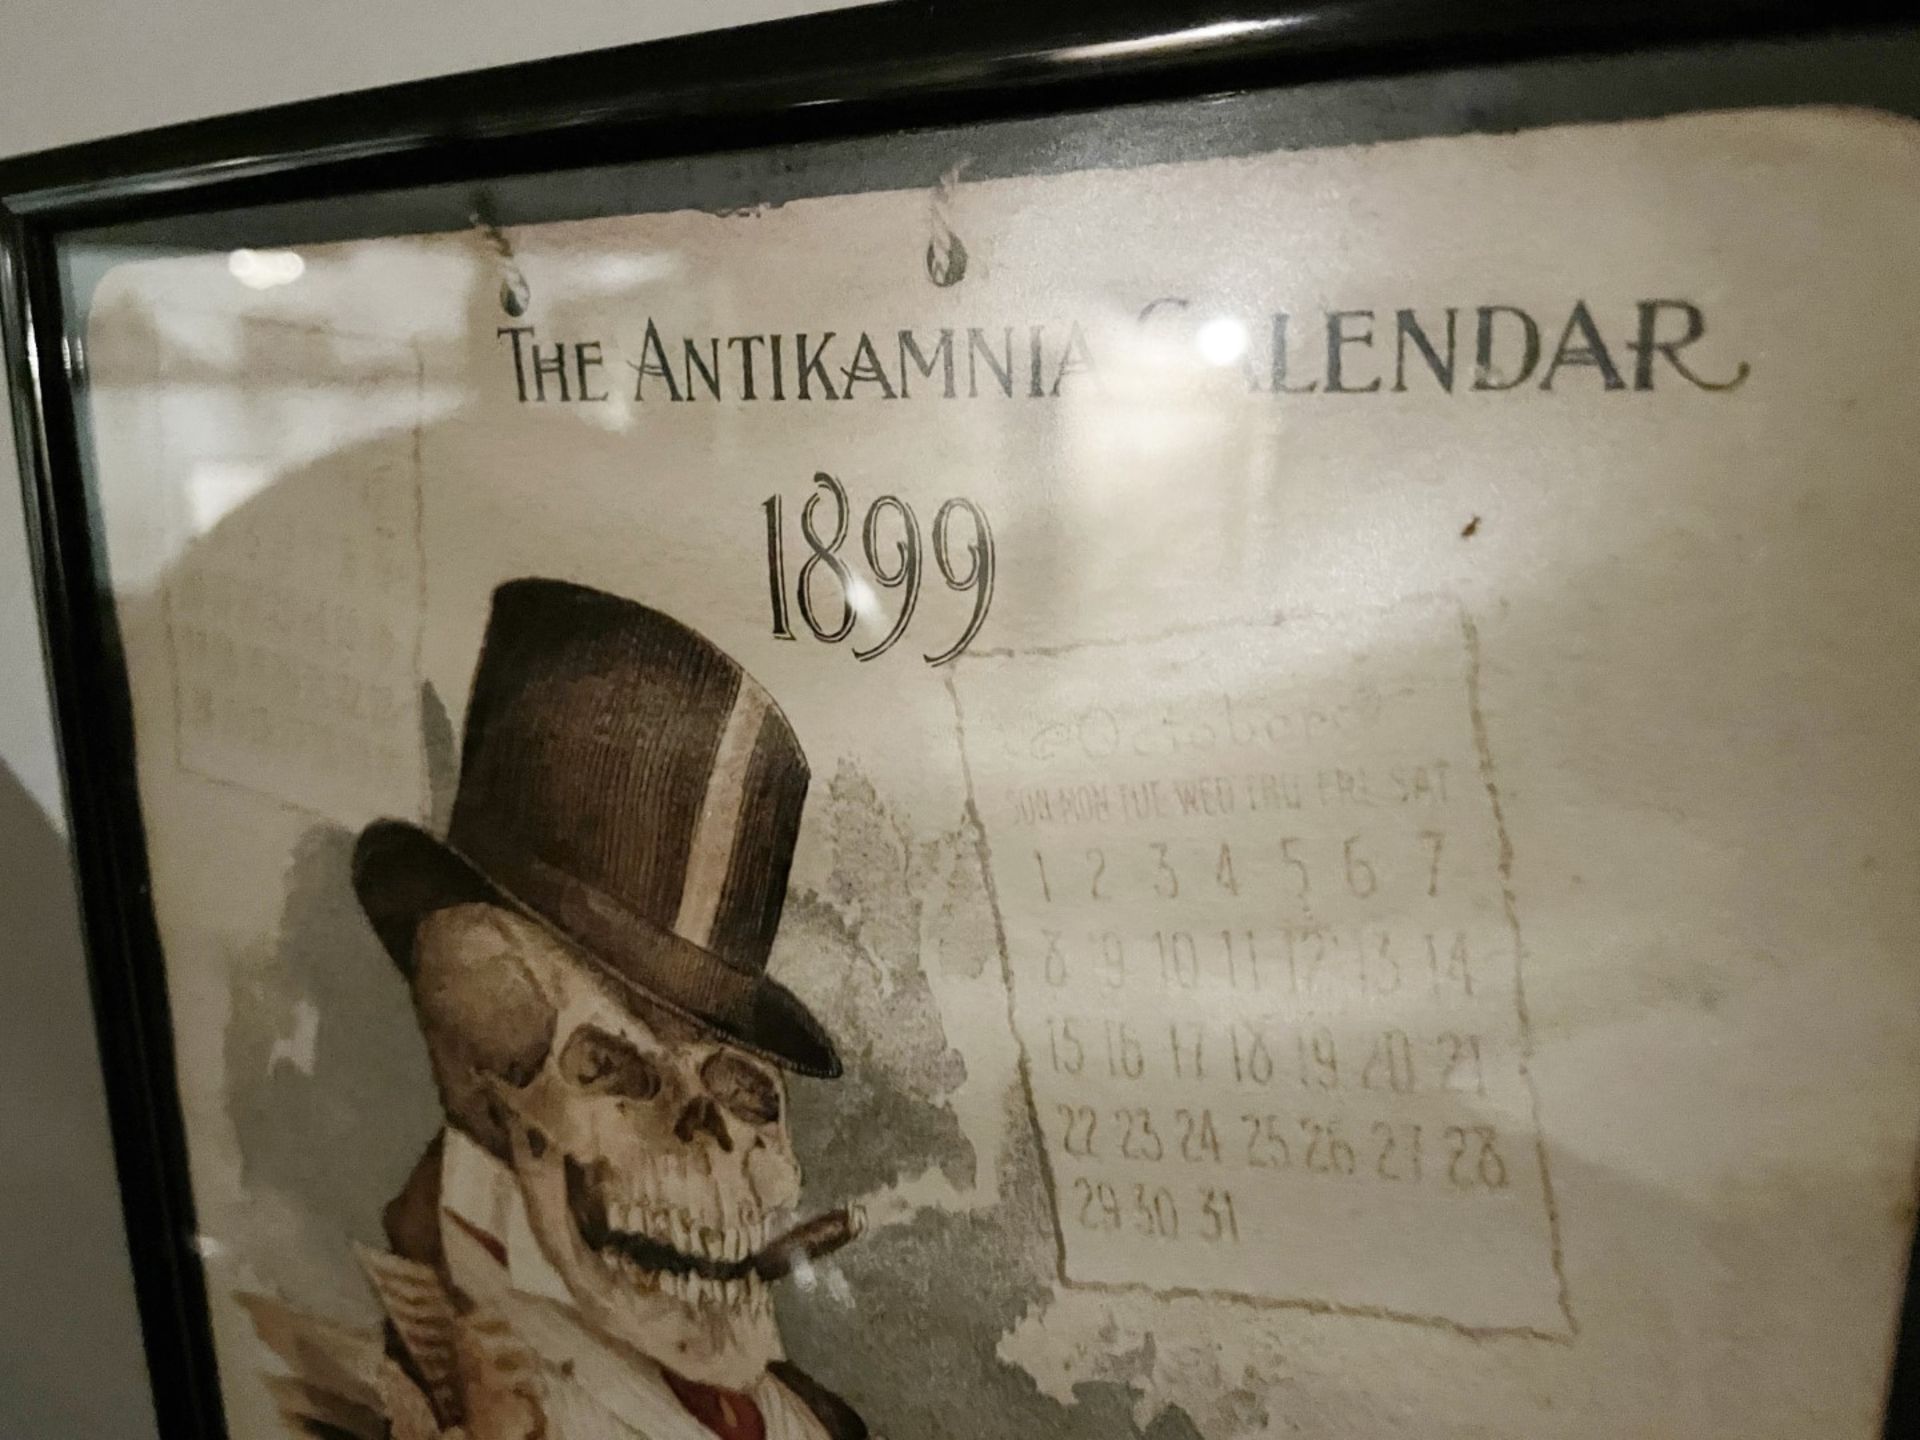 3 x Assorted Framed Pictures Including An Iconic Macabre Image from the 1899 Antikamnia Calendar - Image 6 of 6